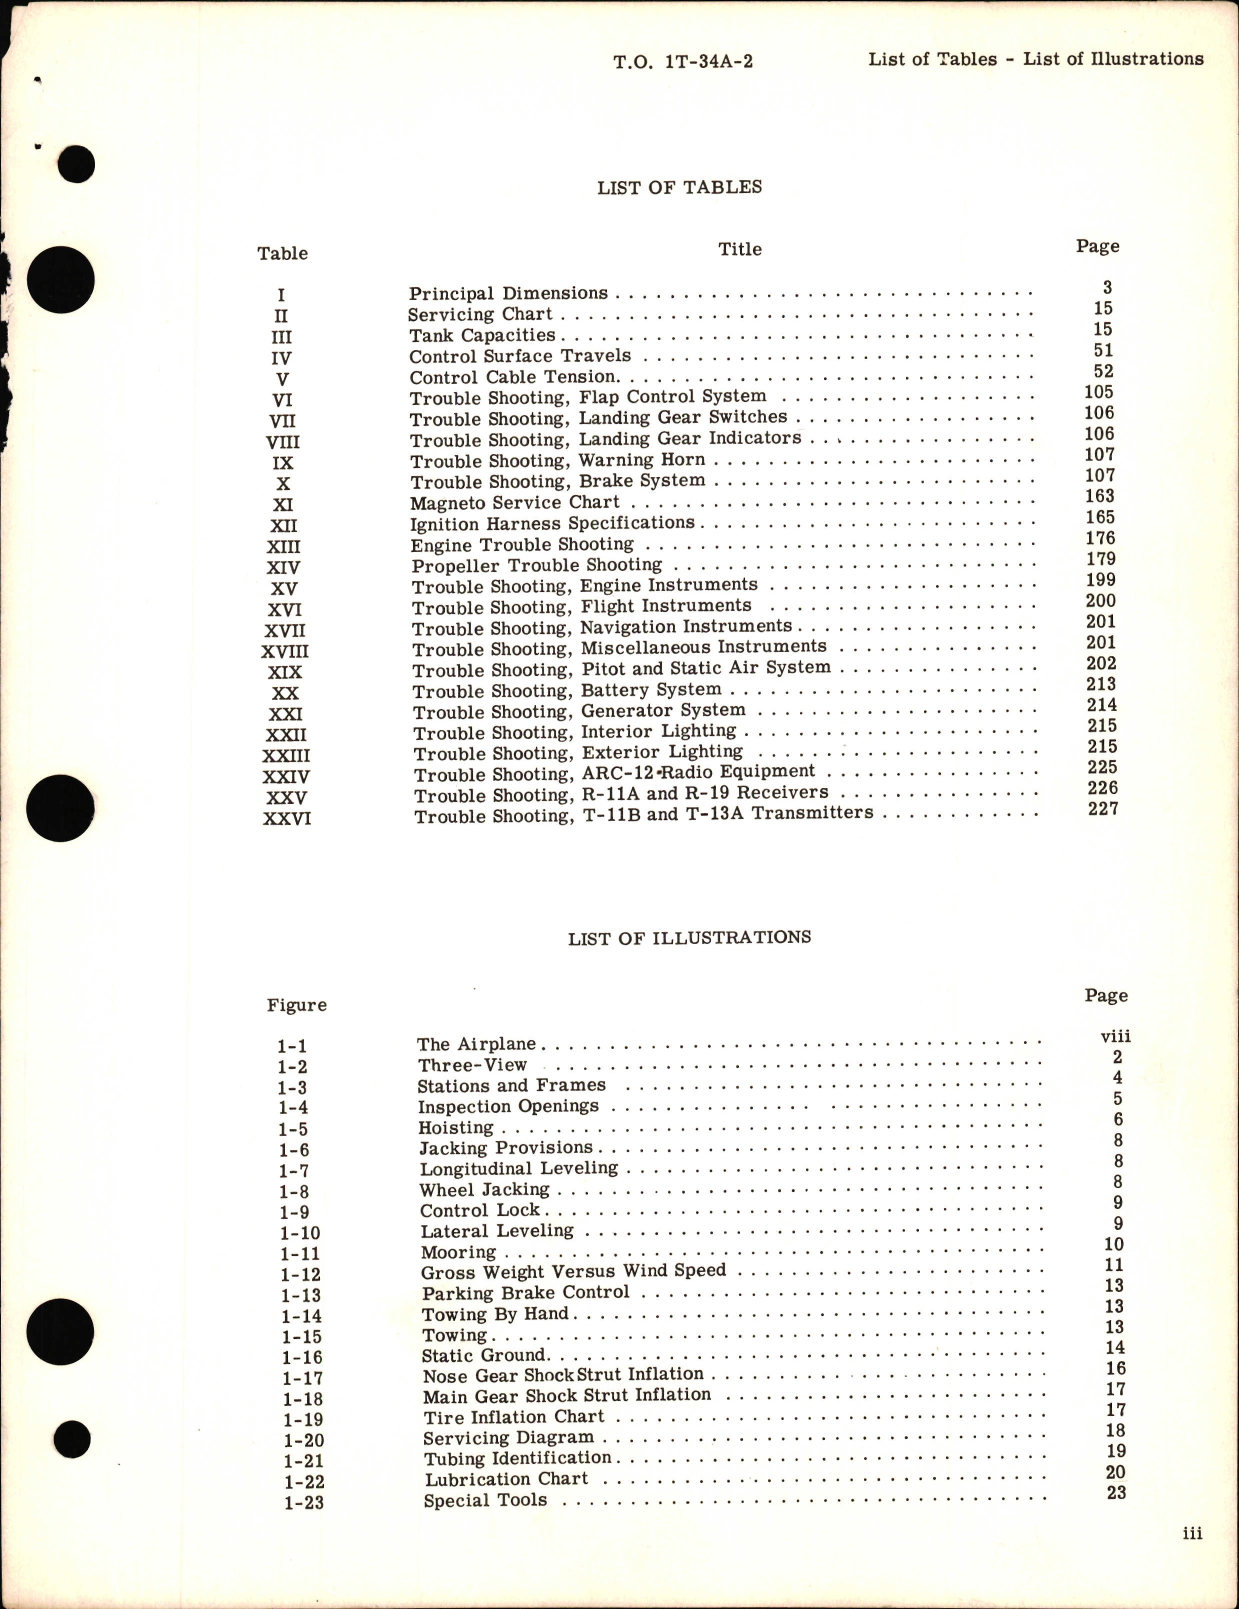 Sample page 5 from AirCorps Library document: Maintenance Manual for T-34A